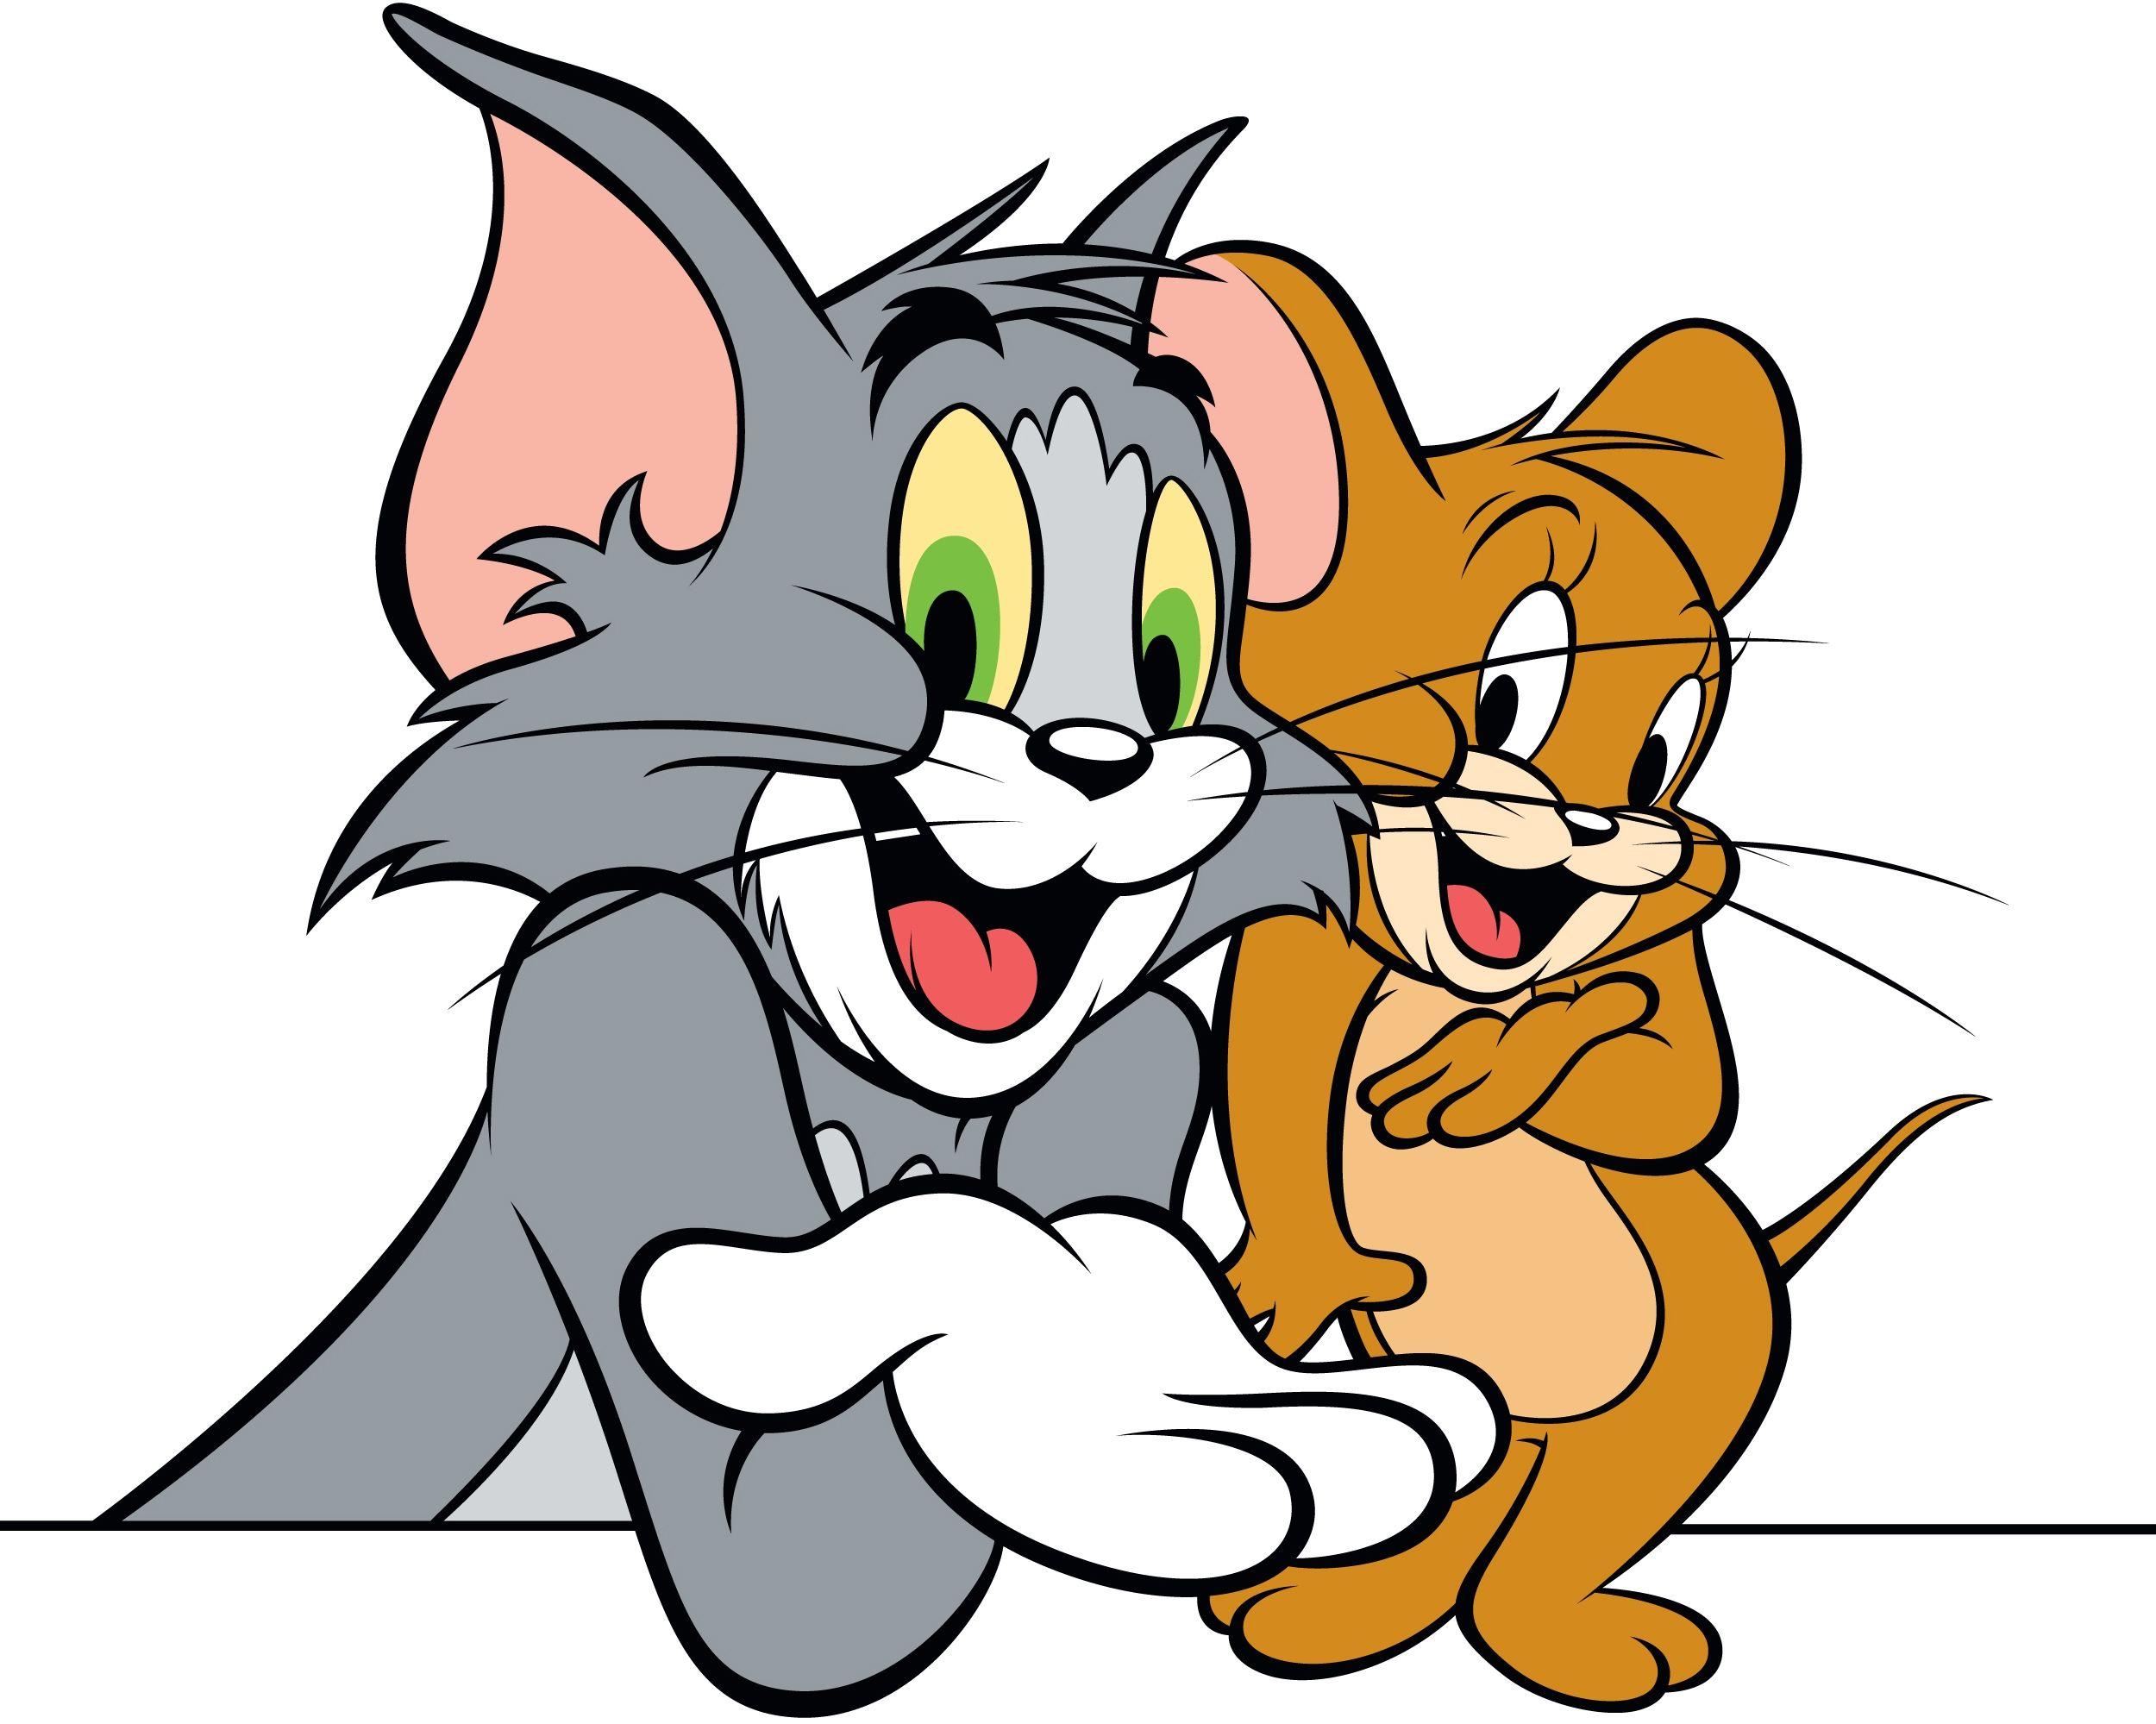 Tom and Jerry Desktop Wallpapers - Top Free Tom and Jerry Desktop